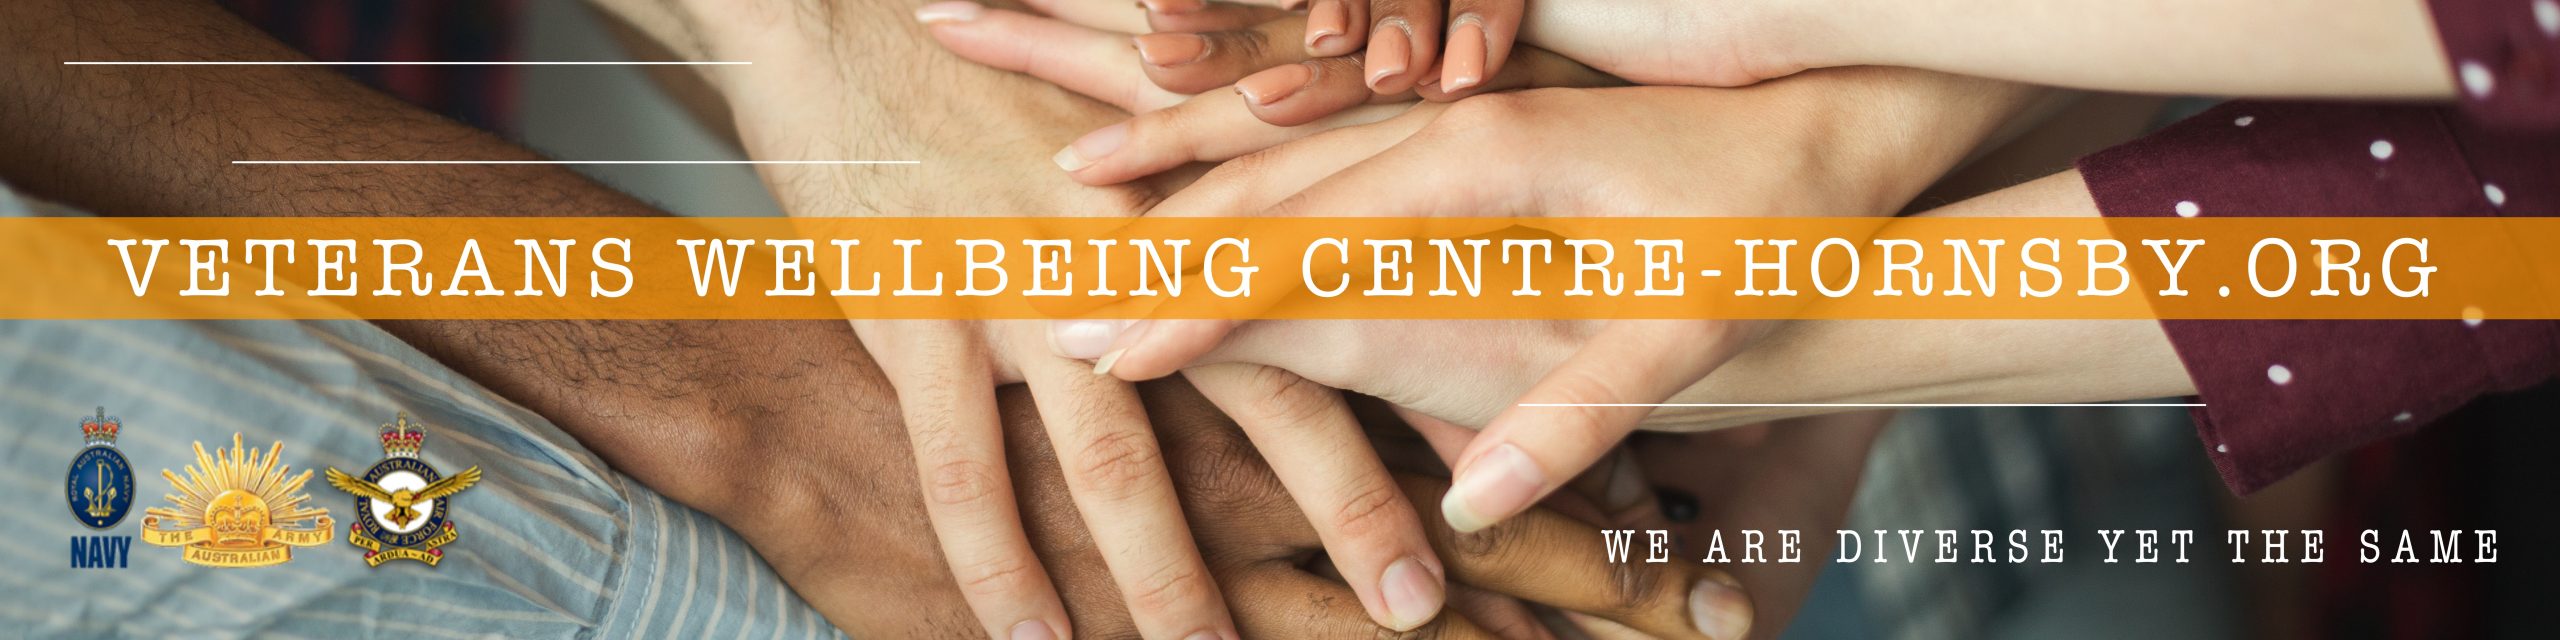 Veterans Wellbeing Centre - Hornsby